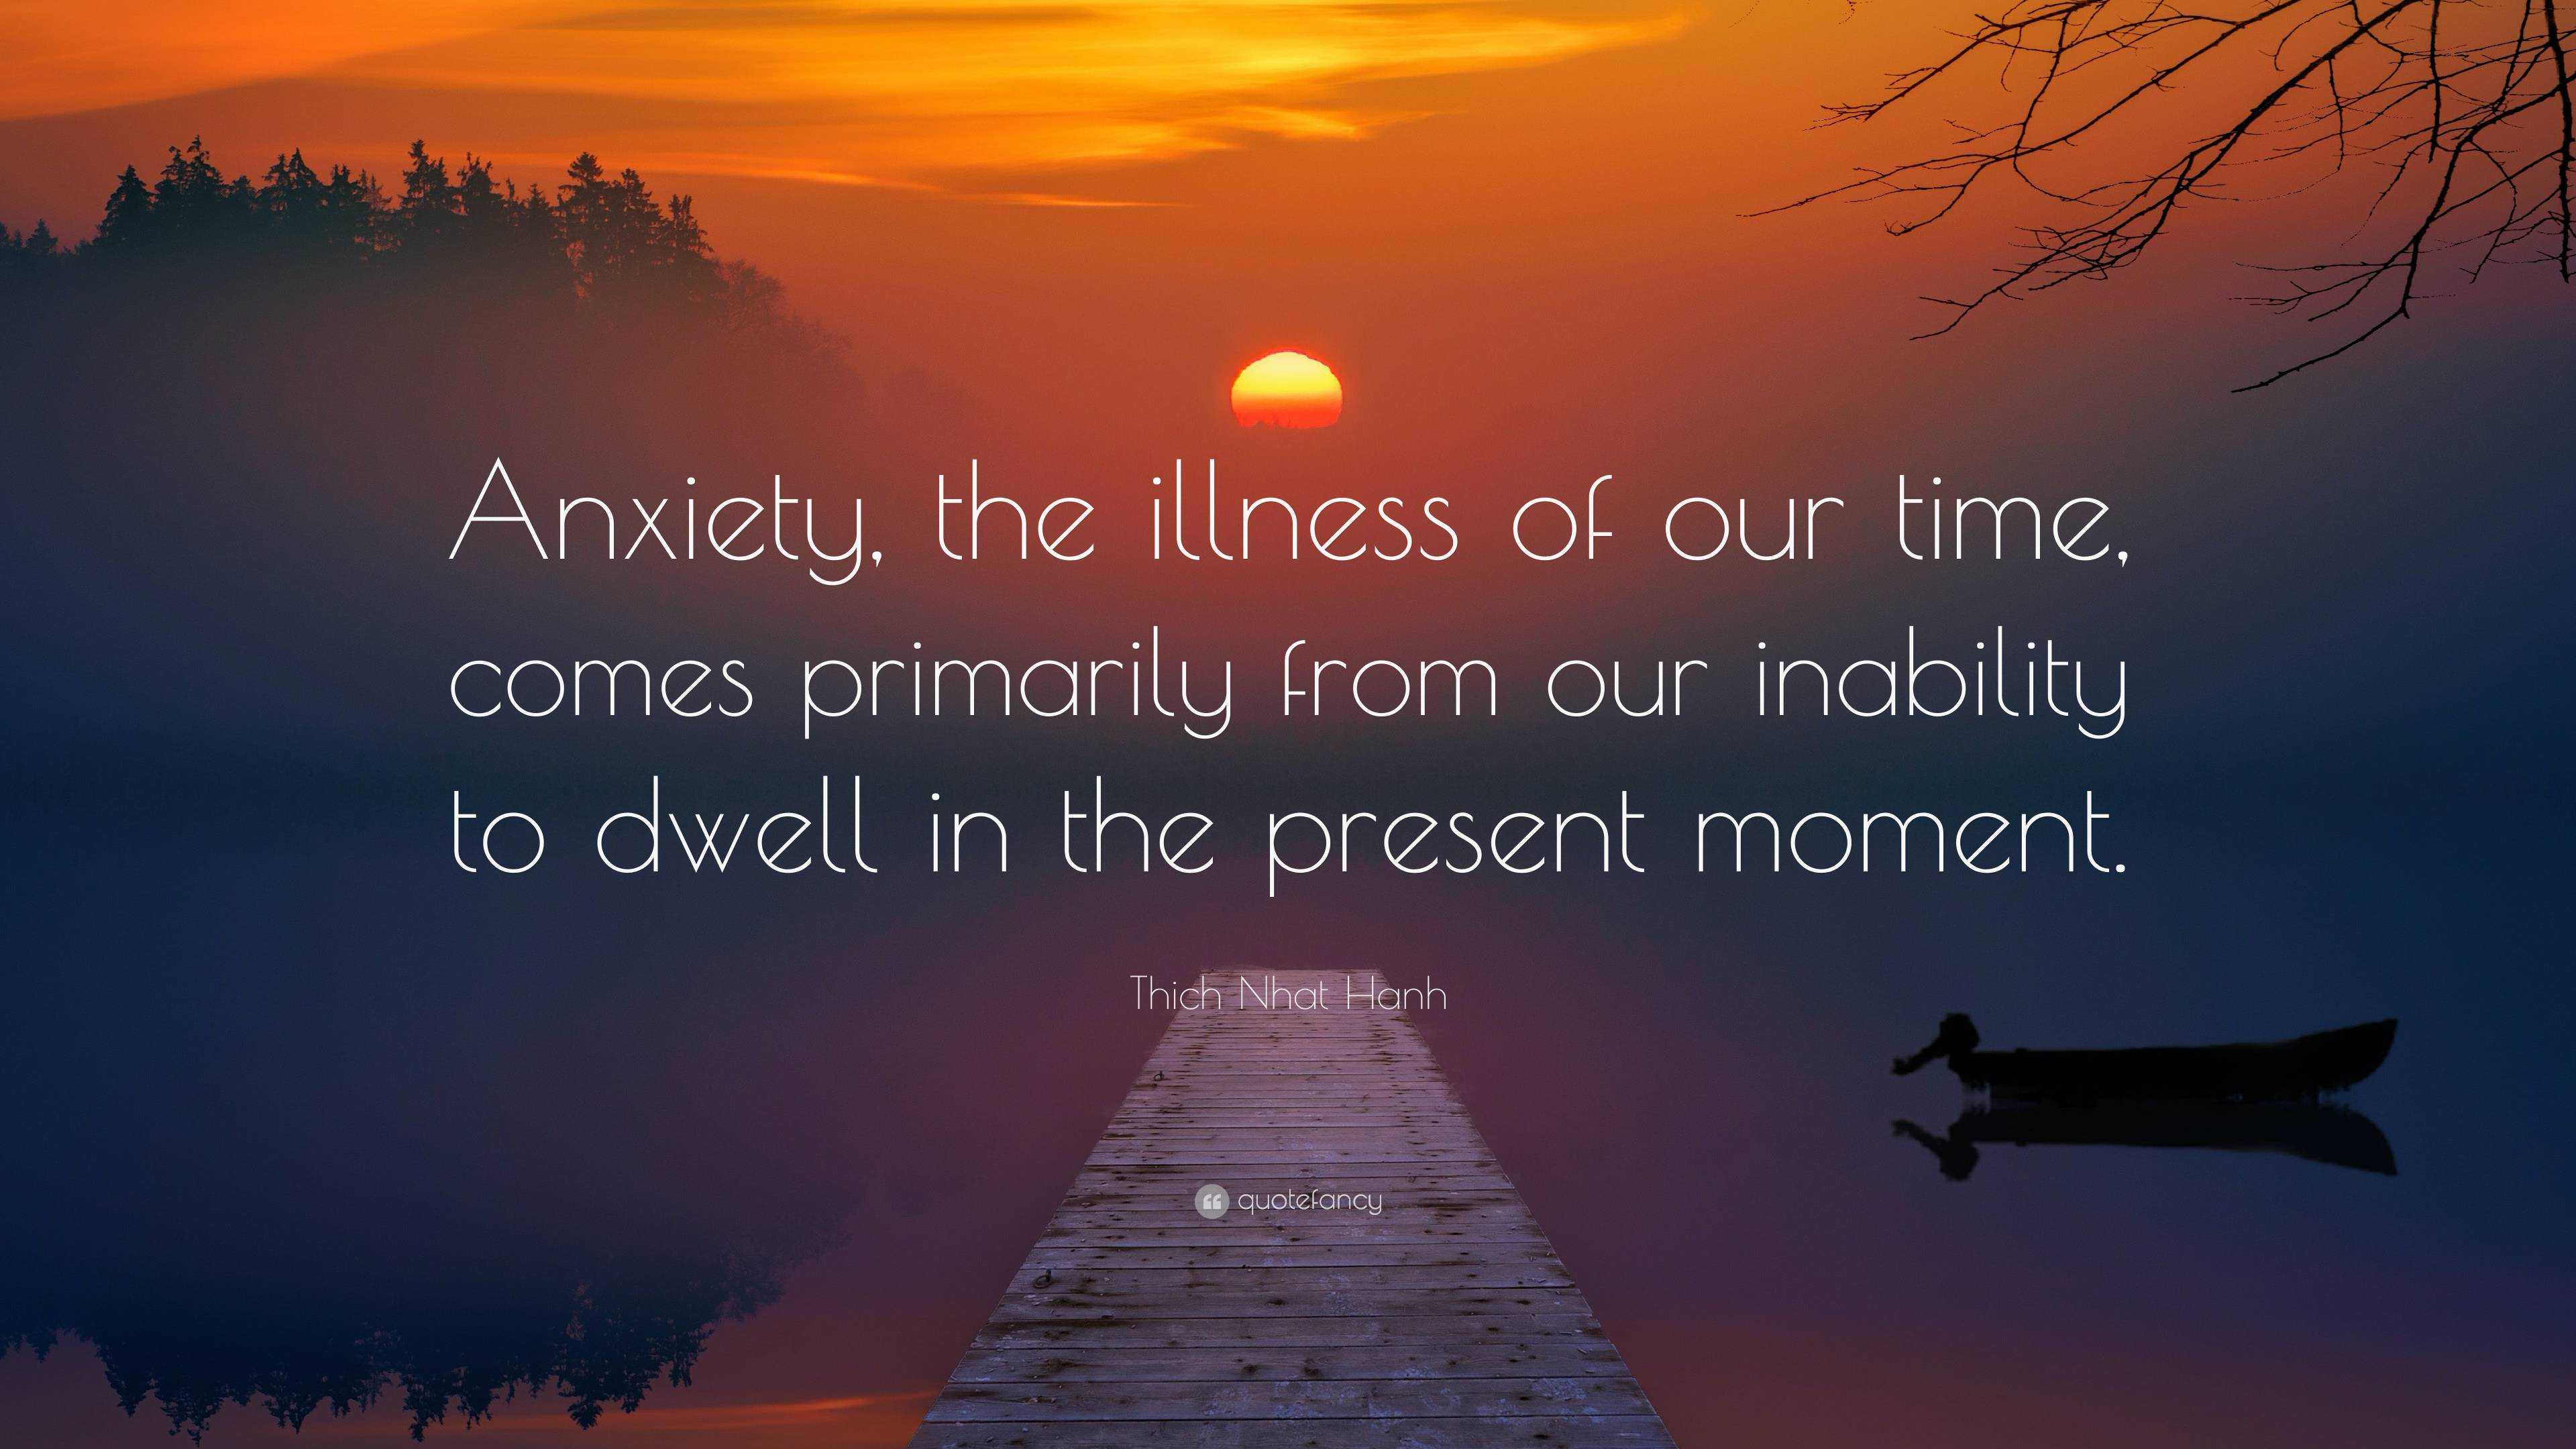 6372727 Thich Nhat Hanh Quote Anxiety the illness of our time comes